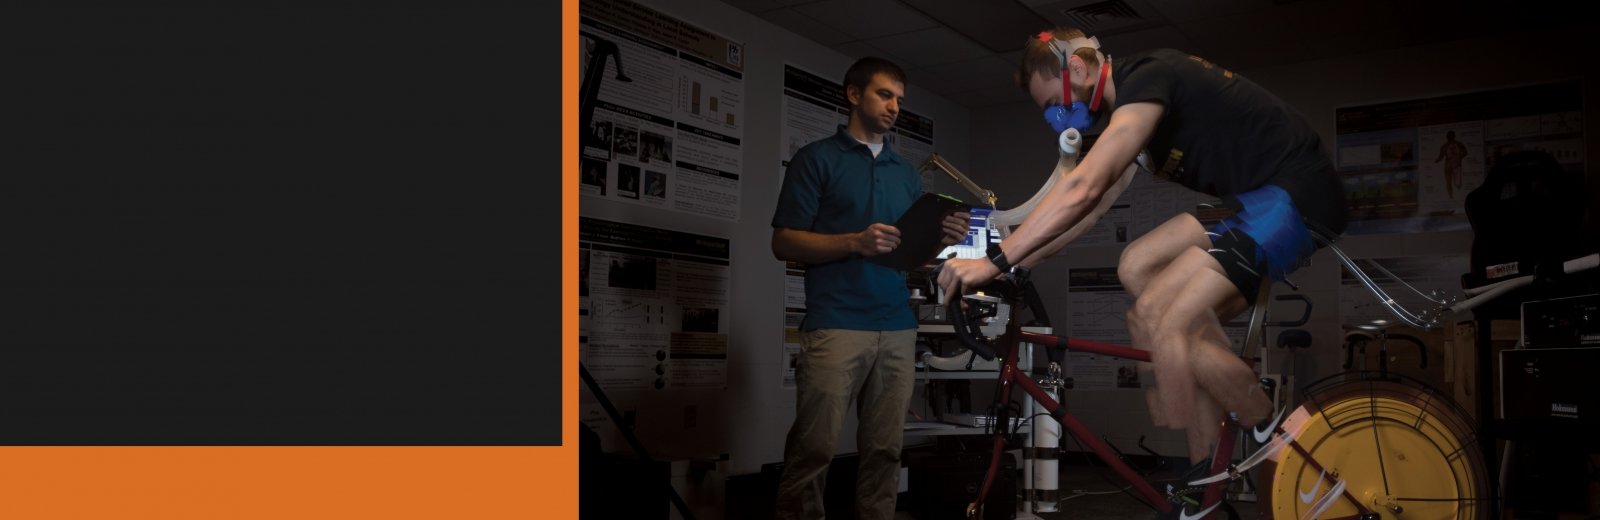 In Elmerâ€™s exercise physiology laboratory, researchers study and seek to understand how muscles in the legs and arms work. This is important for restoring function after injury, maintaining health, and improving performance.